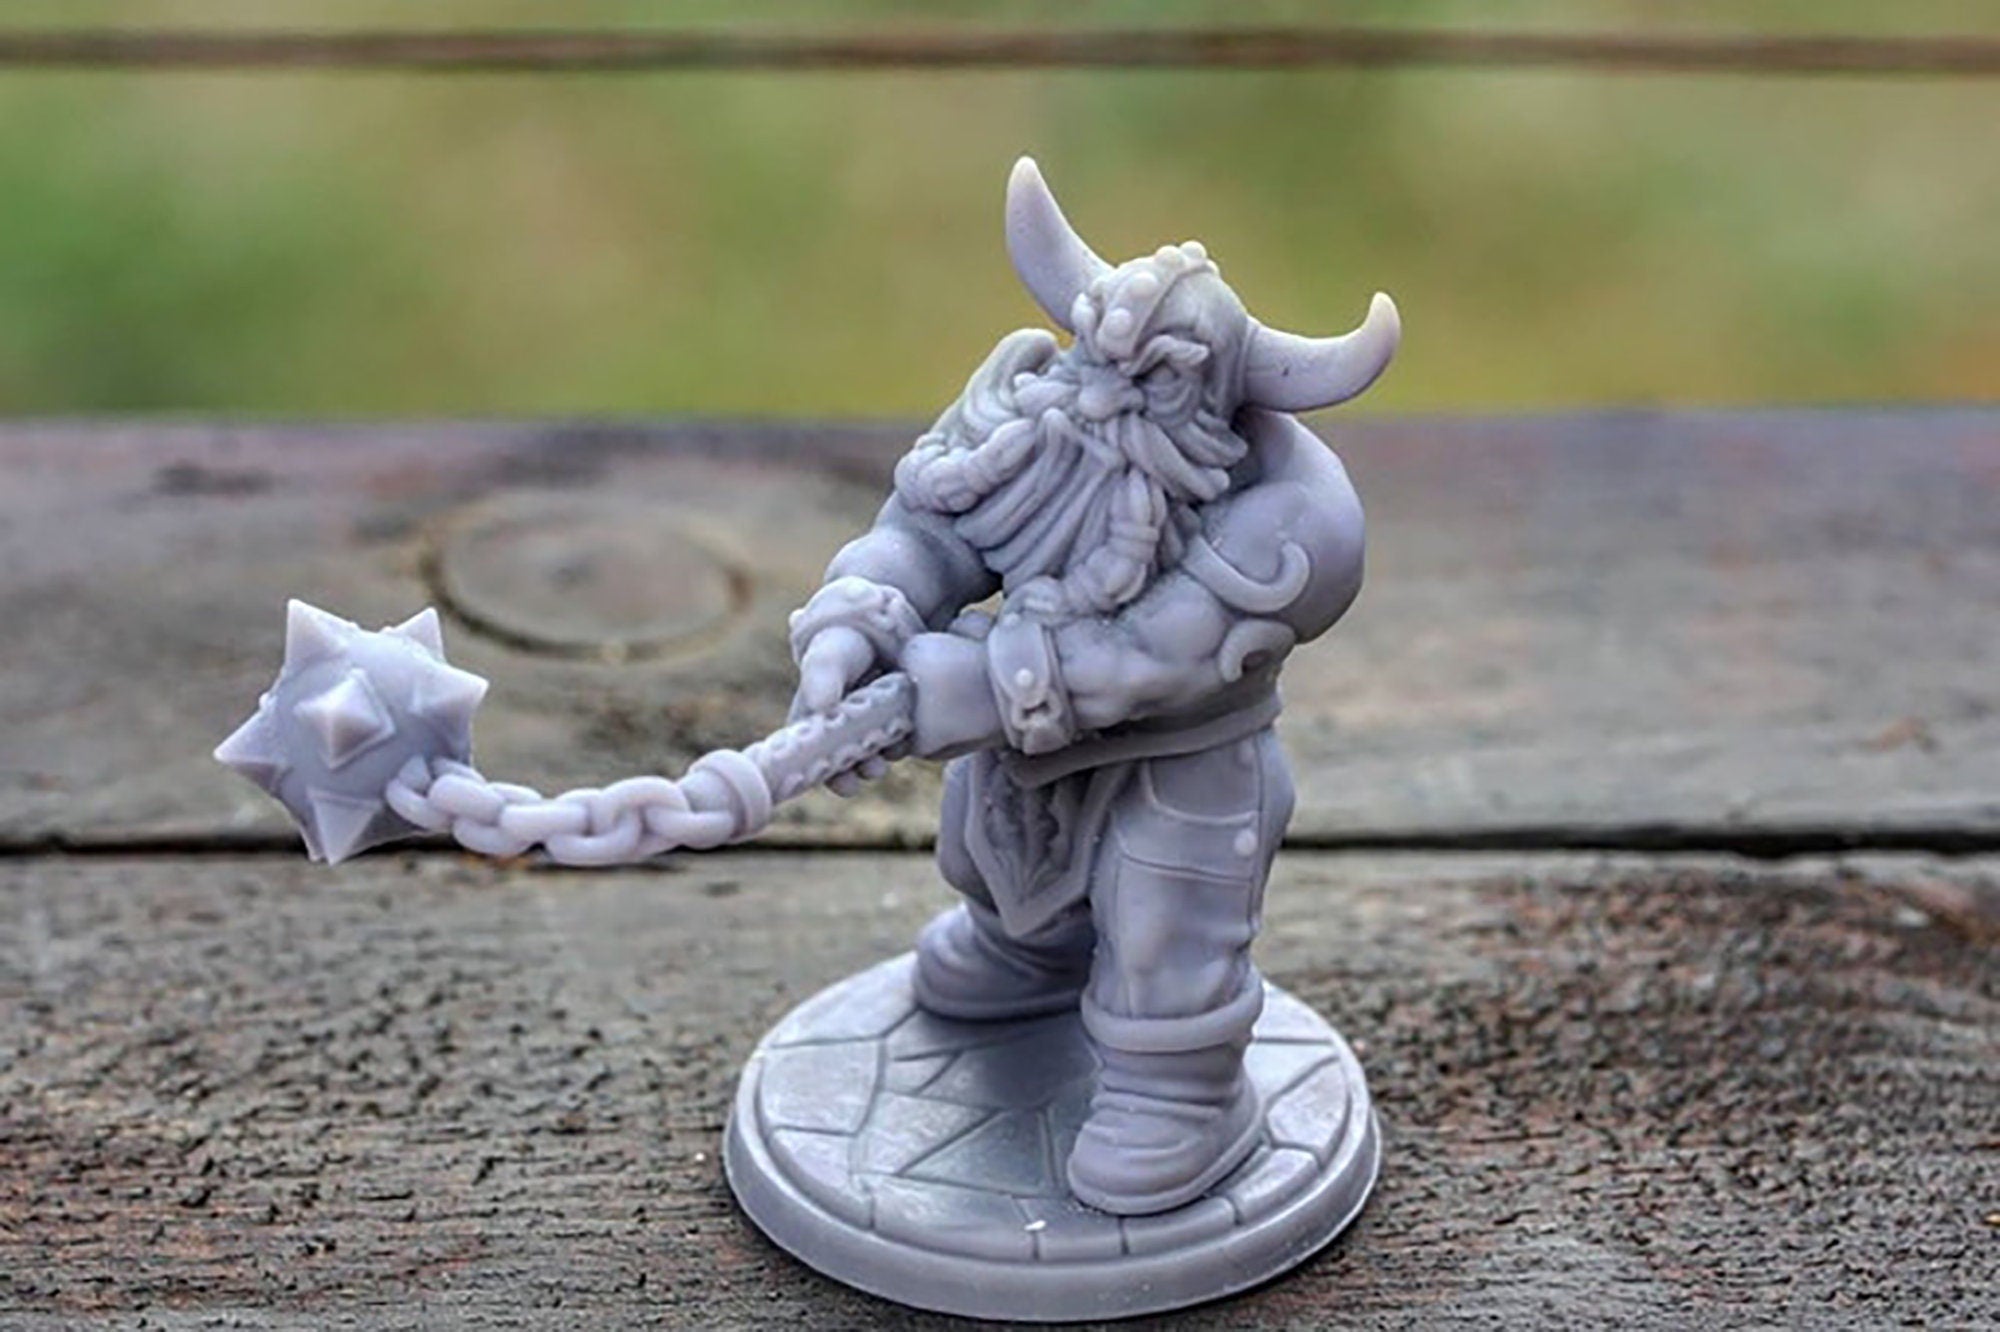 DWARF BARBARIAN (M) "Doli the smasher" | Dungeons and Dragons | DnD | Pathfinder | Tabletop | RPG | Hero Size | 28 mm-Role Playing Miniatures